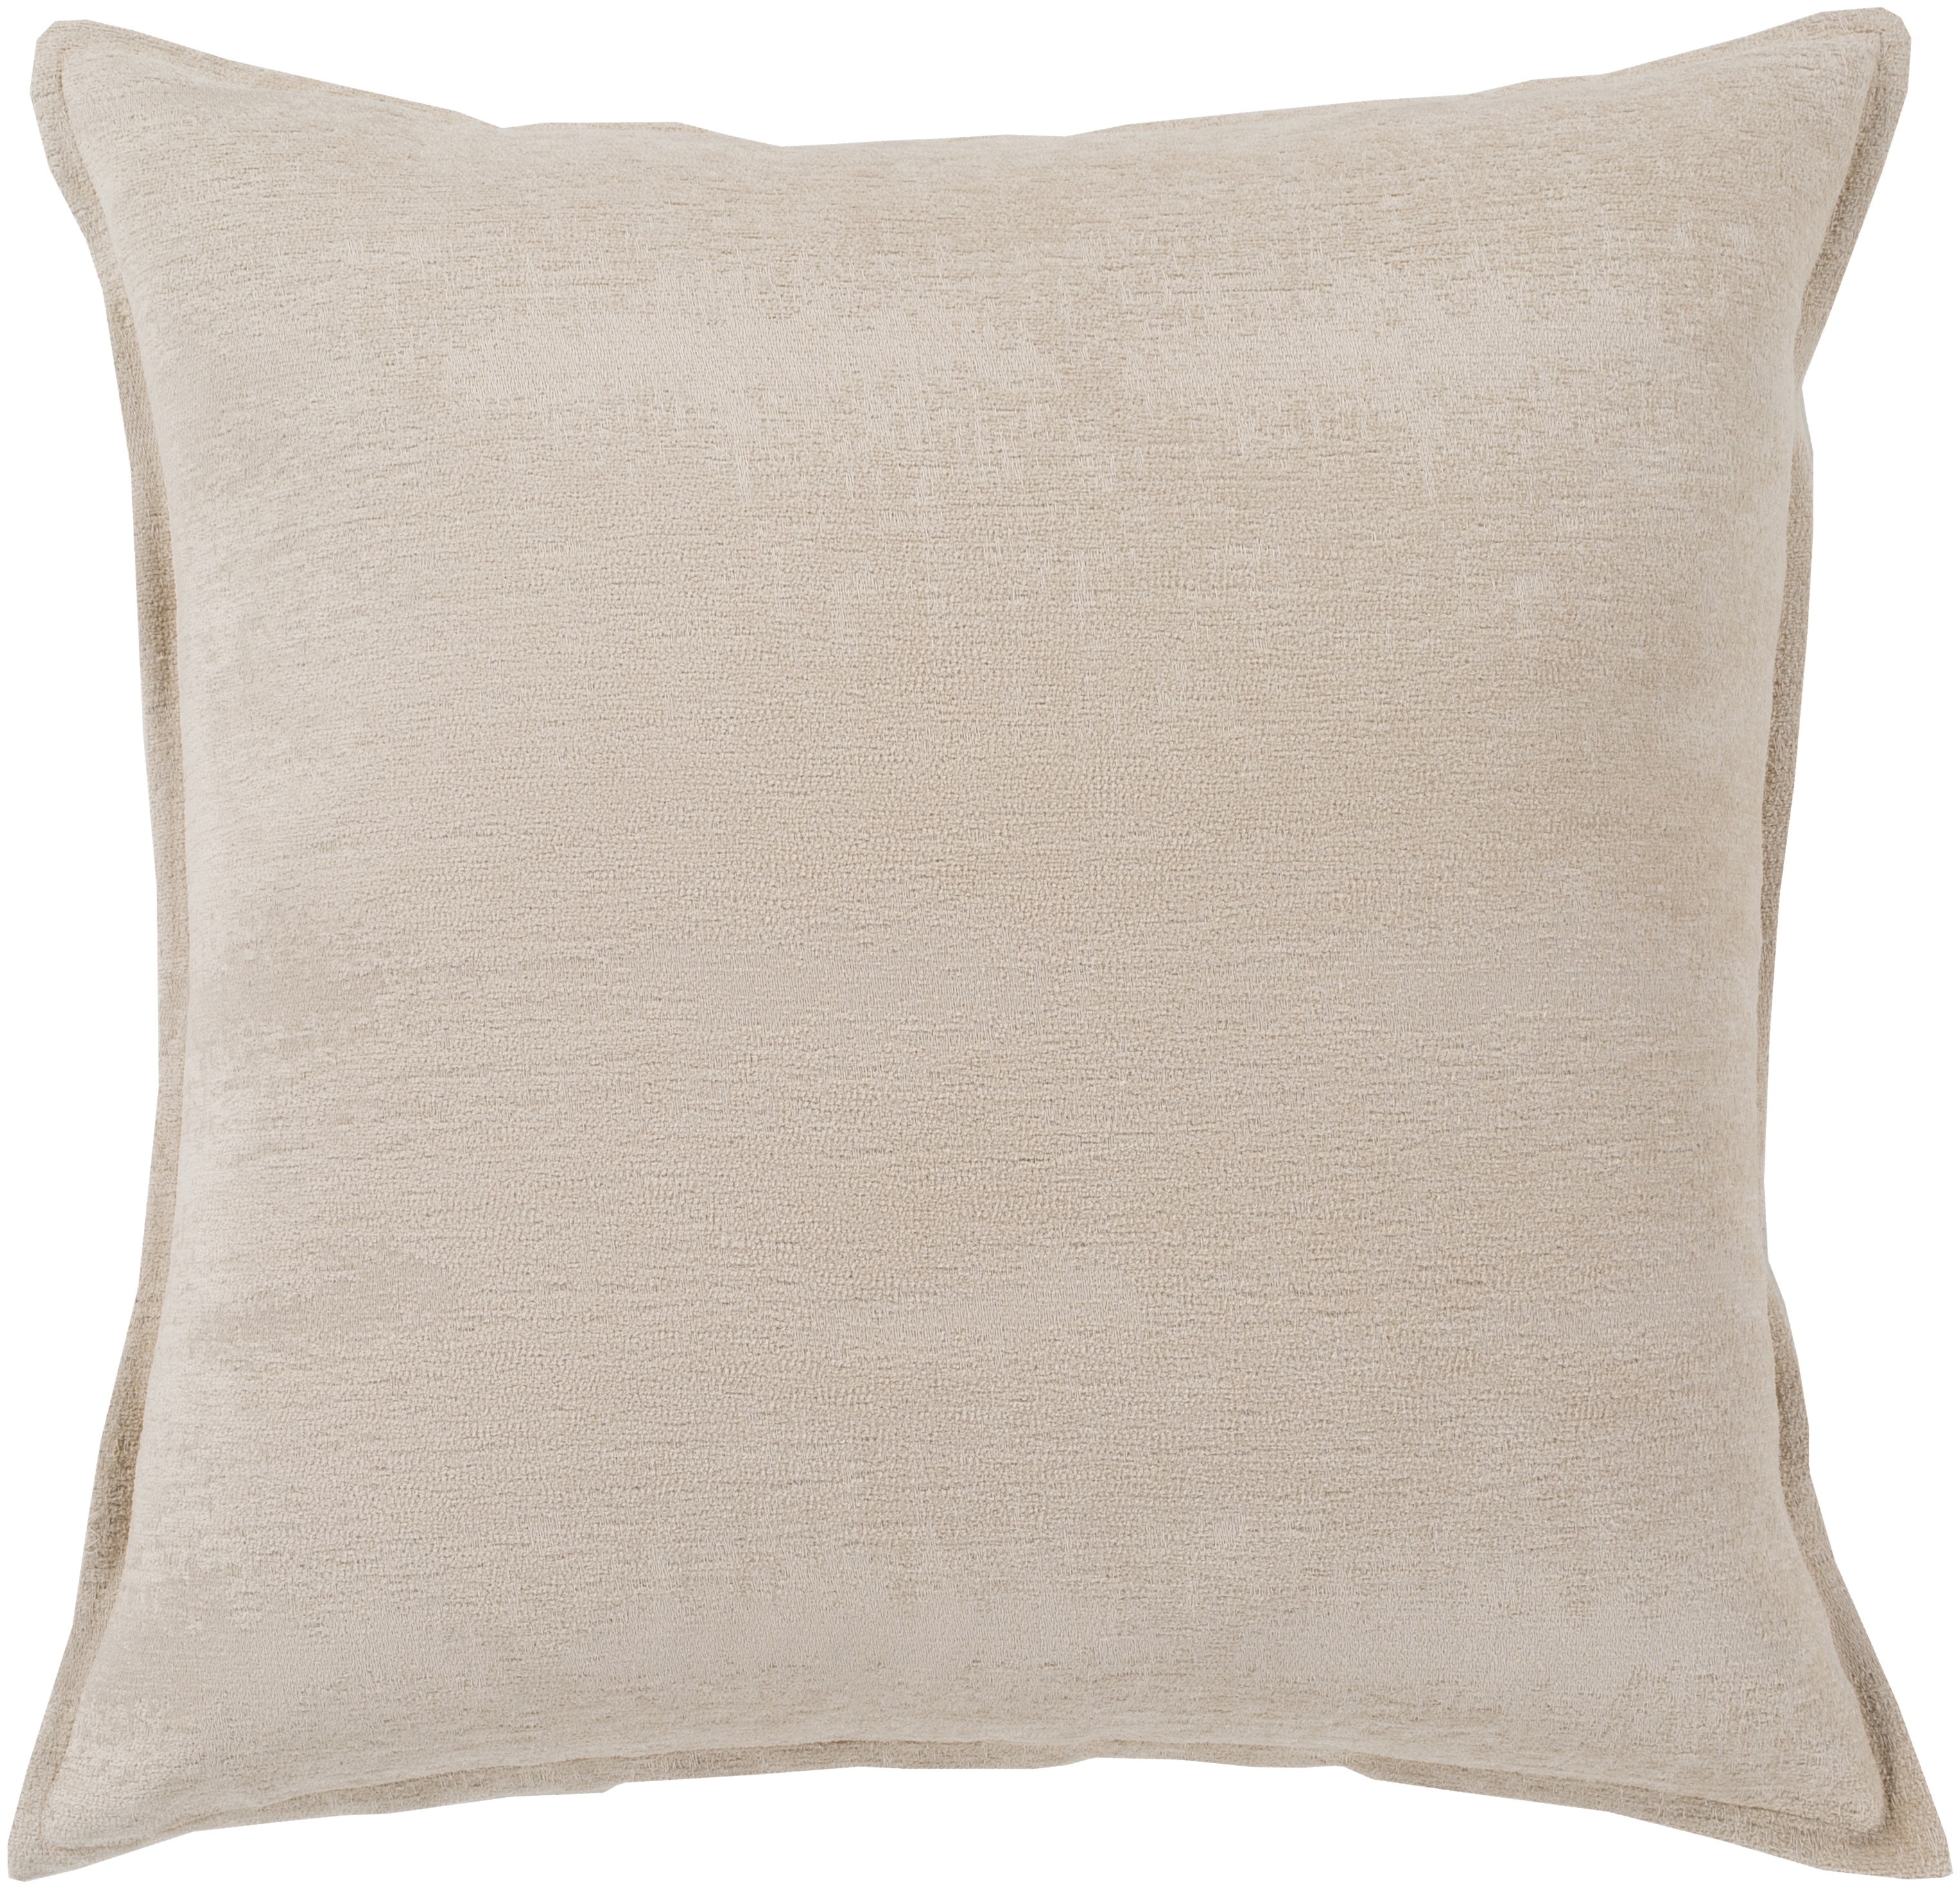 Copacetic Throw Pillow, 20" x 20", with poly insert - Image 0